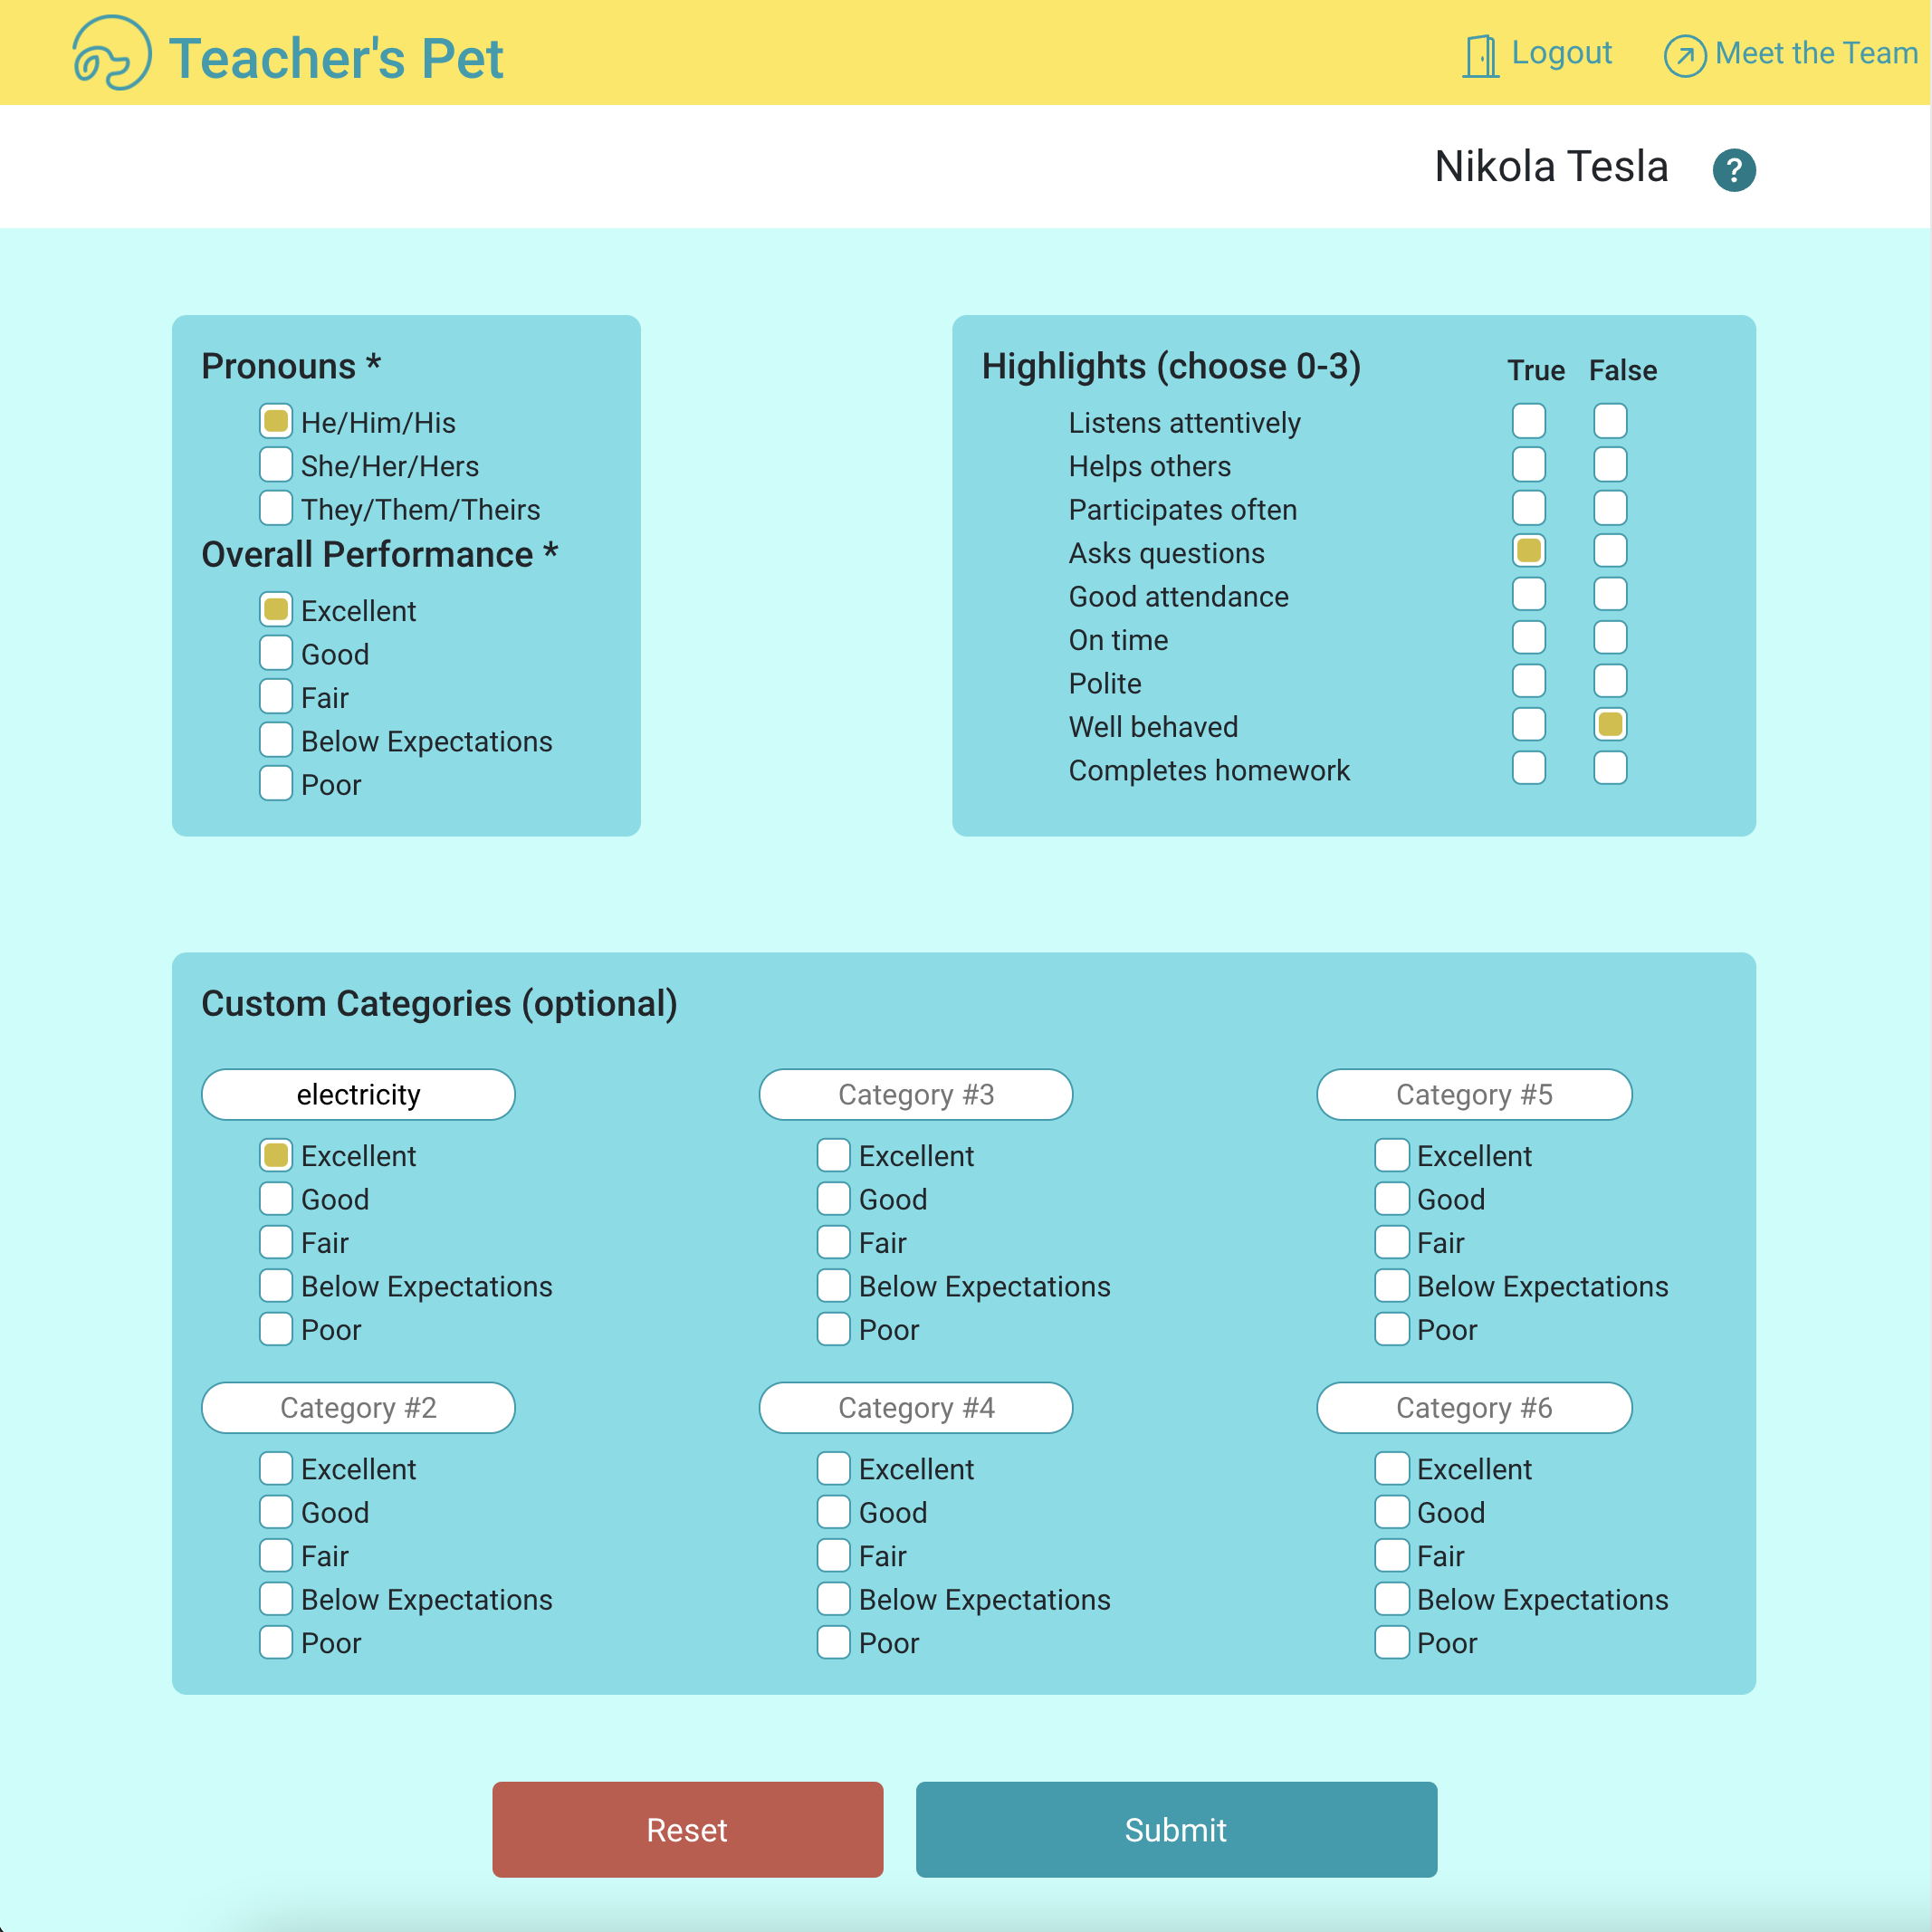 An image from Teacher's Pet containing a form users utilize to customize reports.